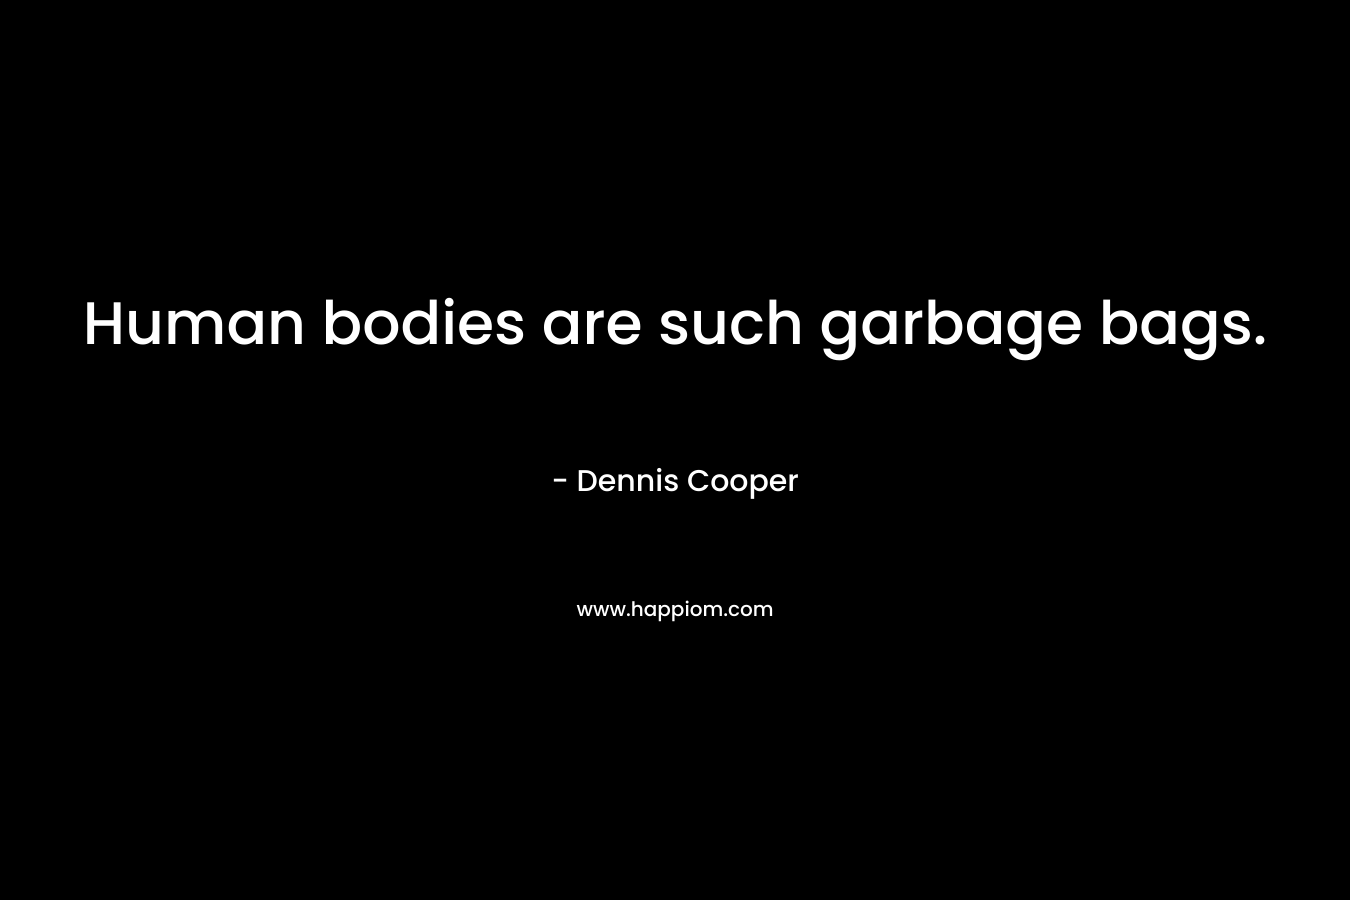 Human bodies are such garbage bags. – Dennis Cooper